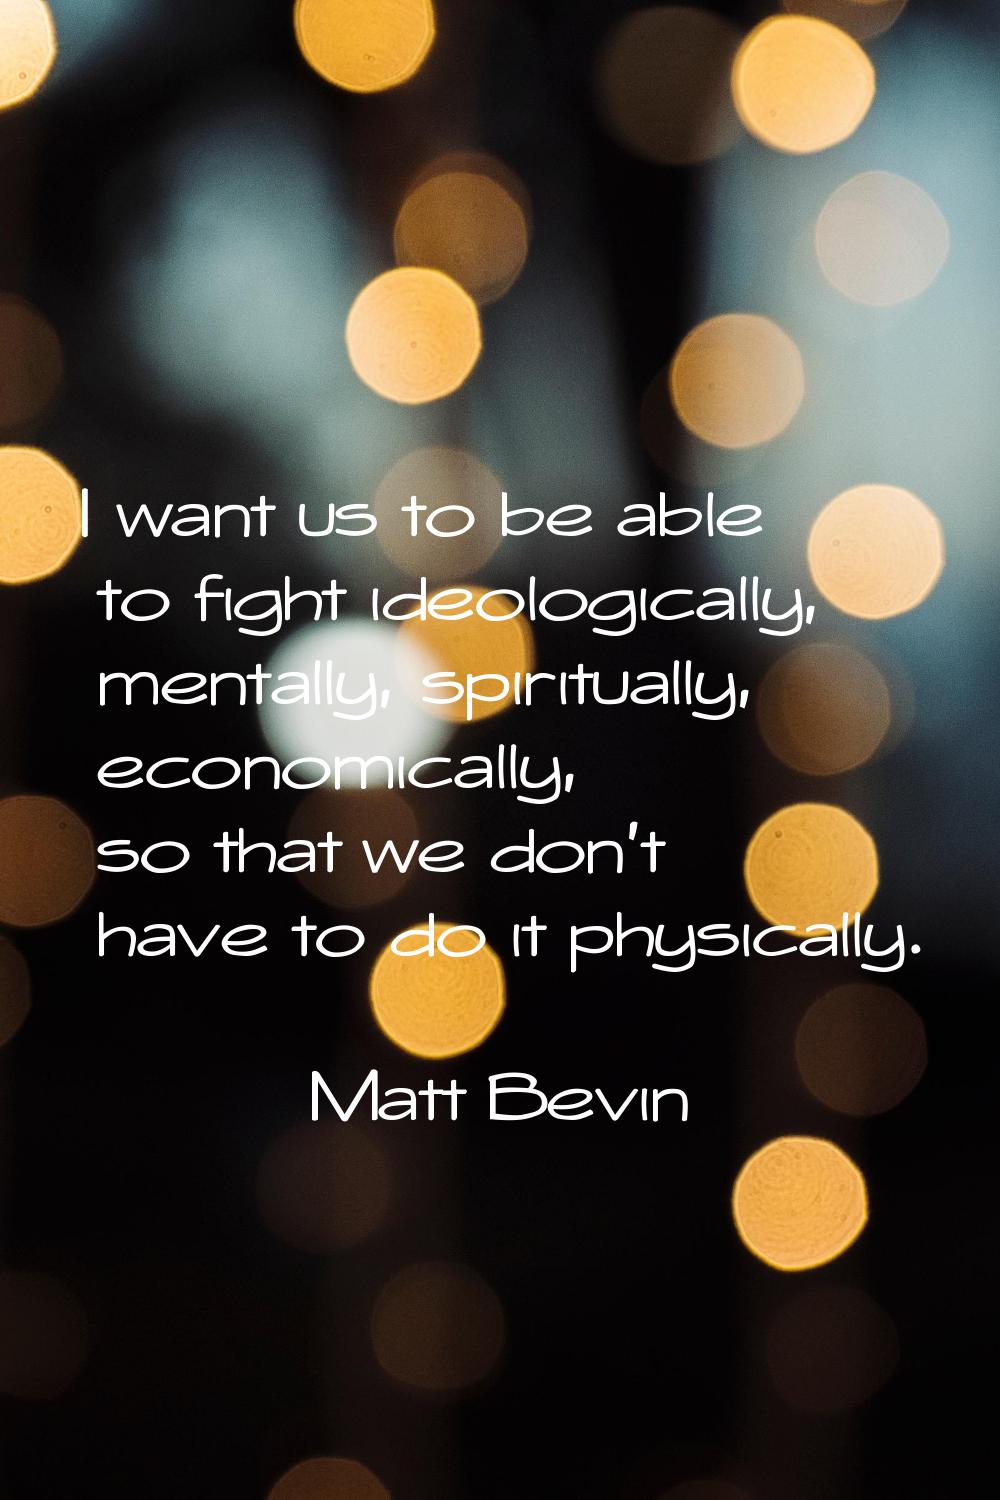 I want us to be able to fight ideologically, mentally, spiritually, economically, so that we don't 